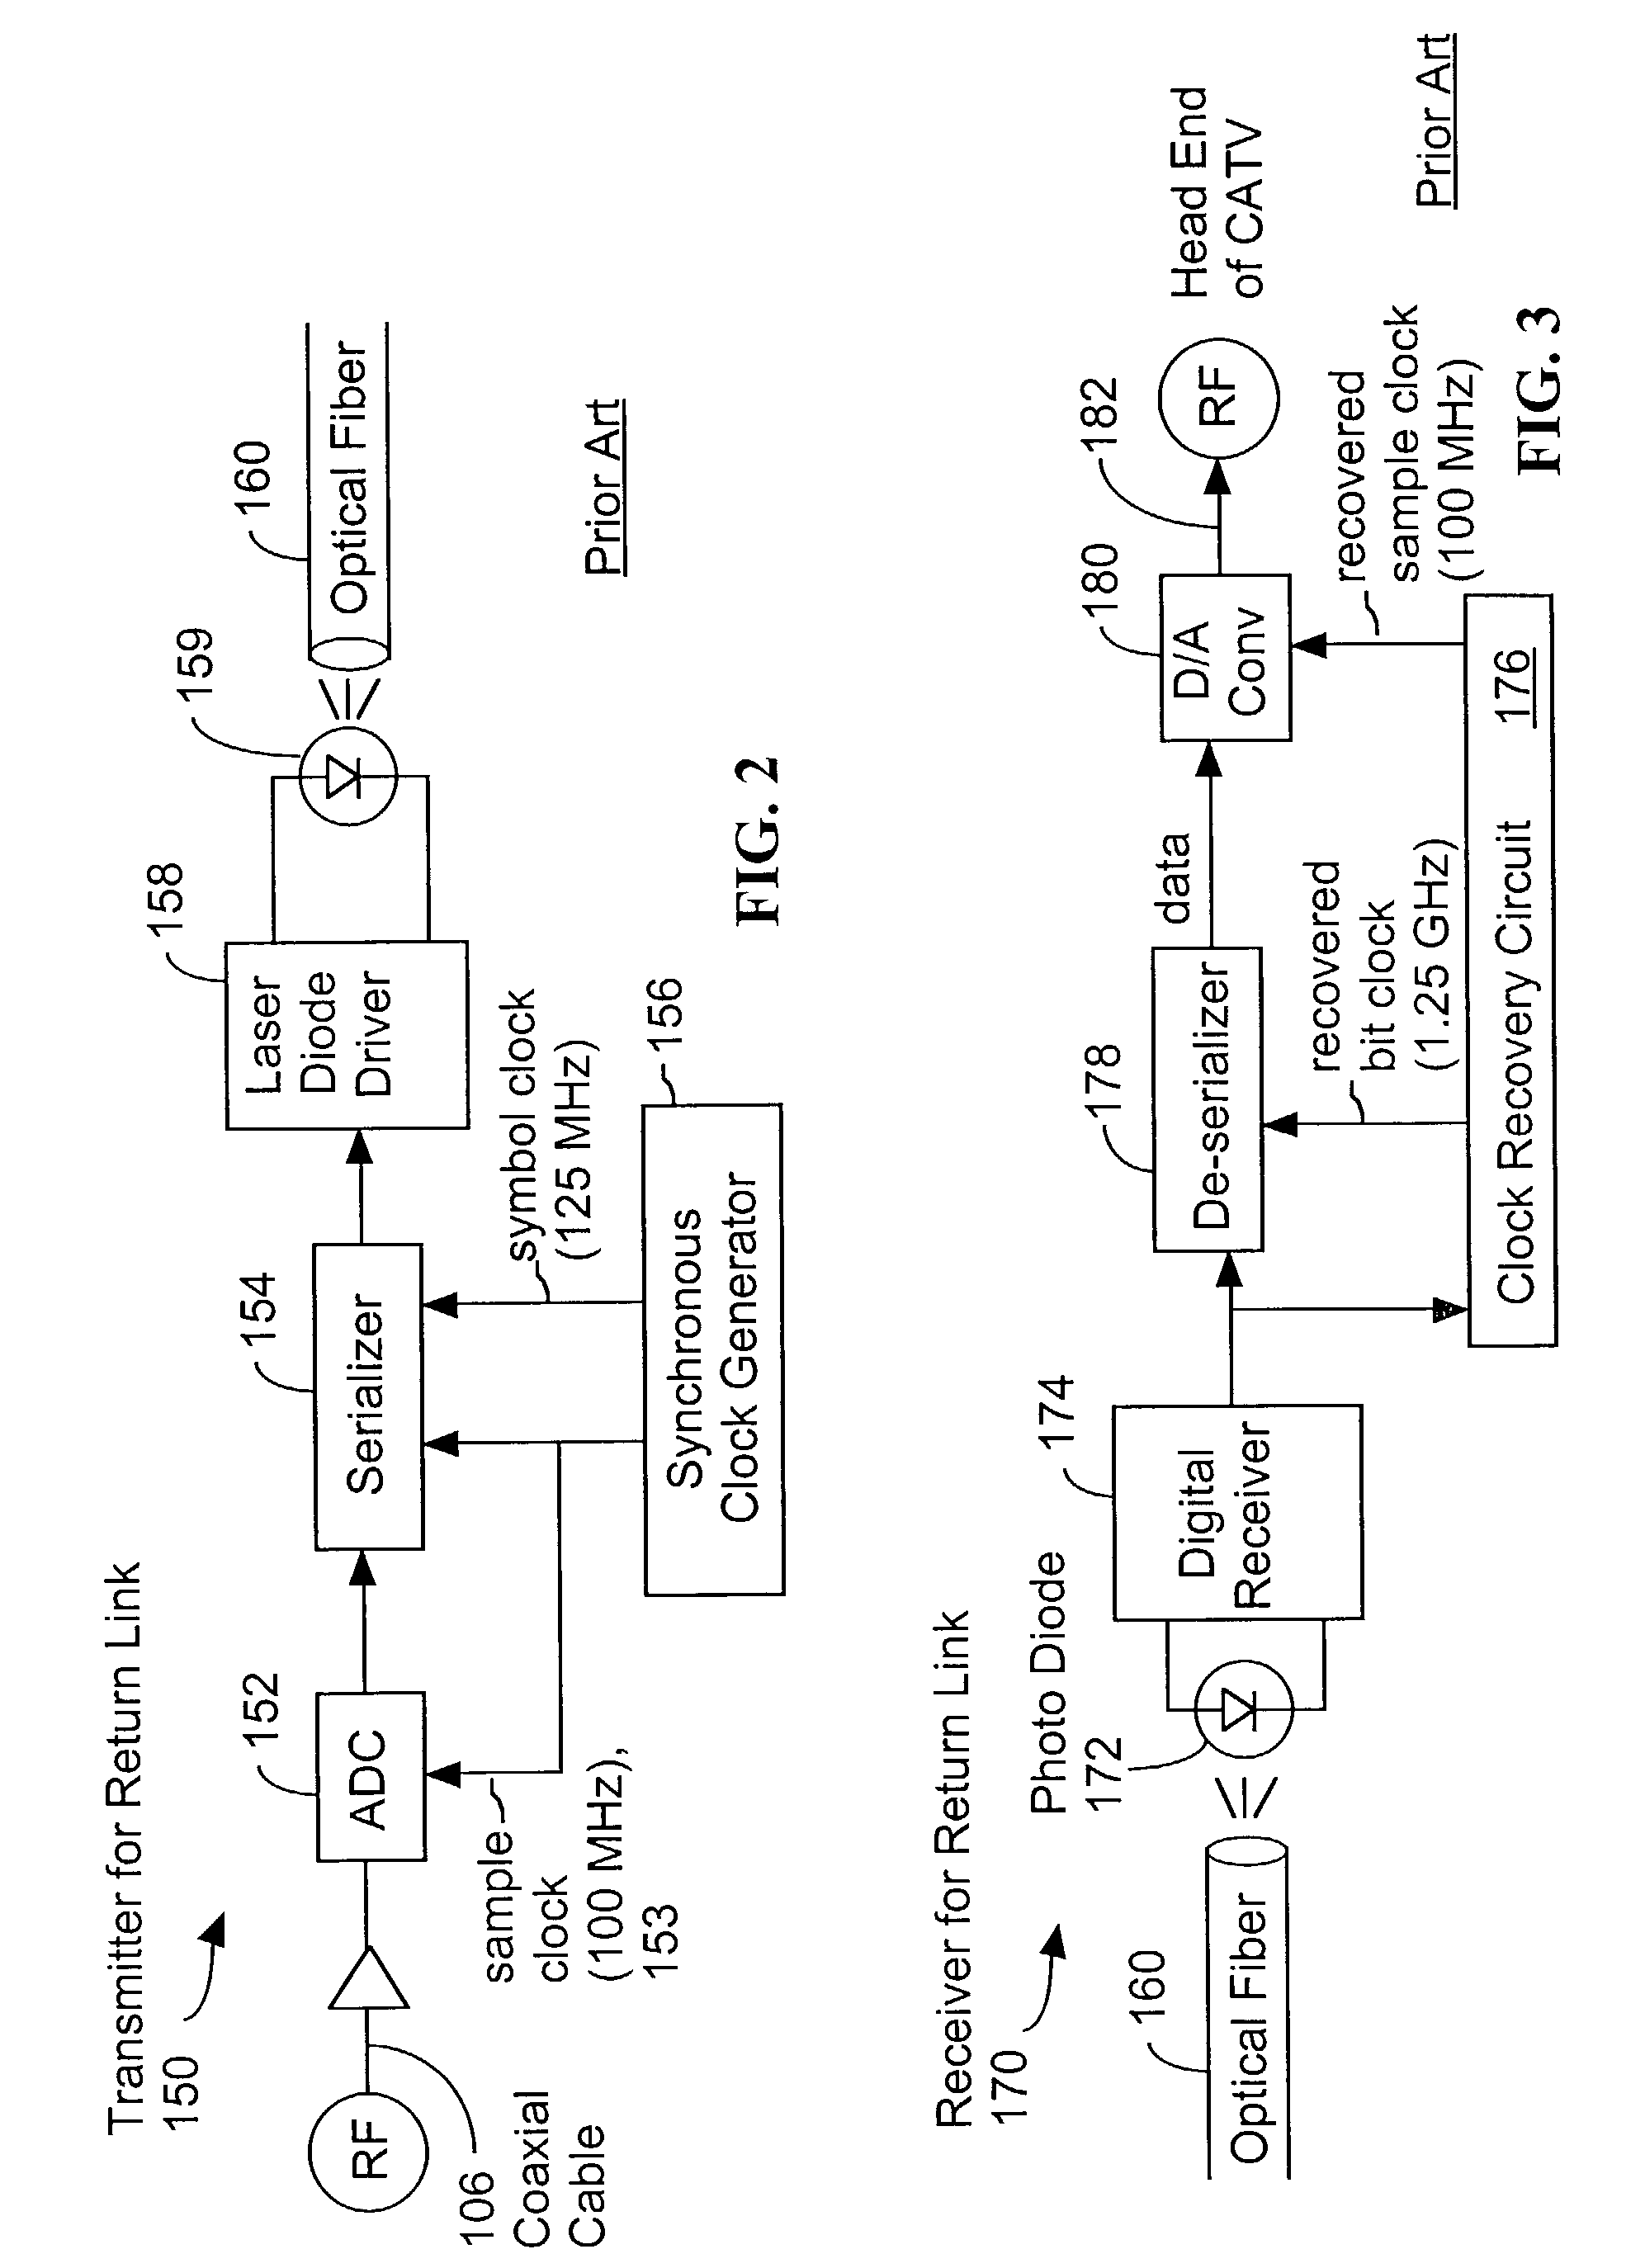 System and method for transmitting data on return path of a cable television system